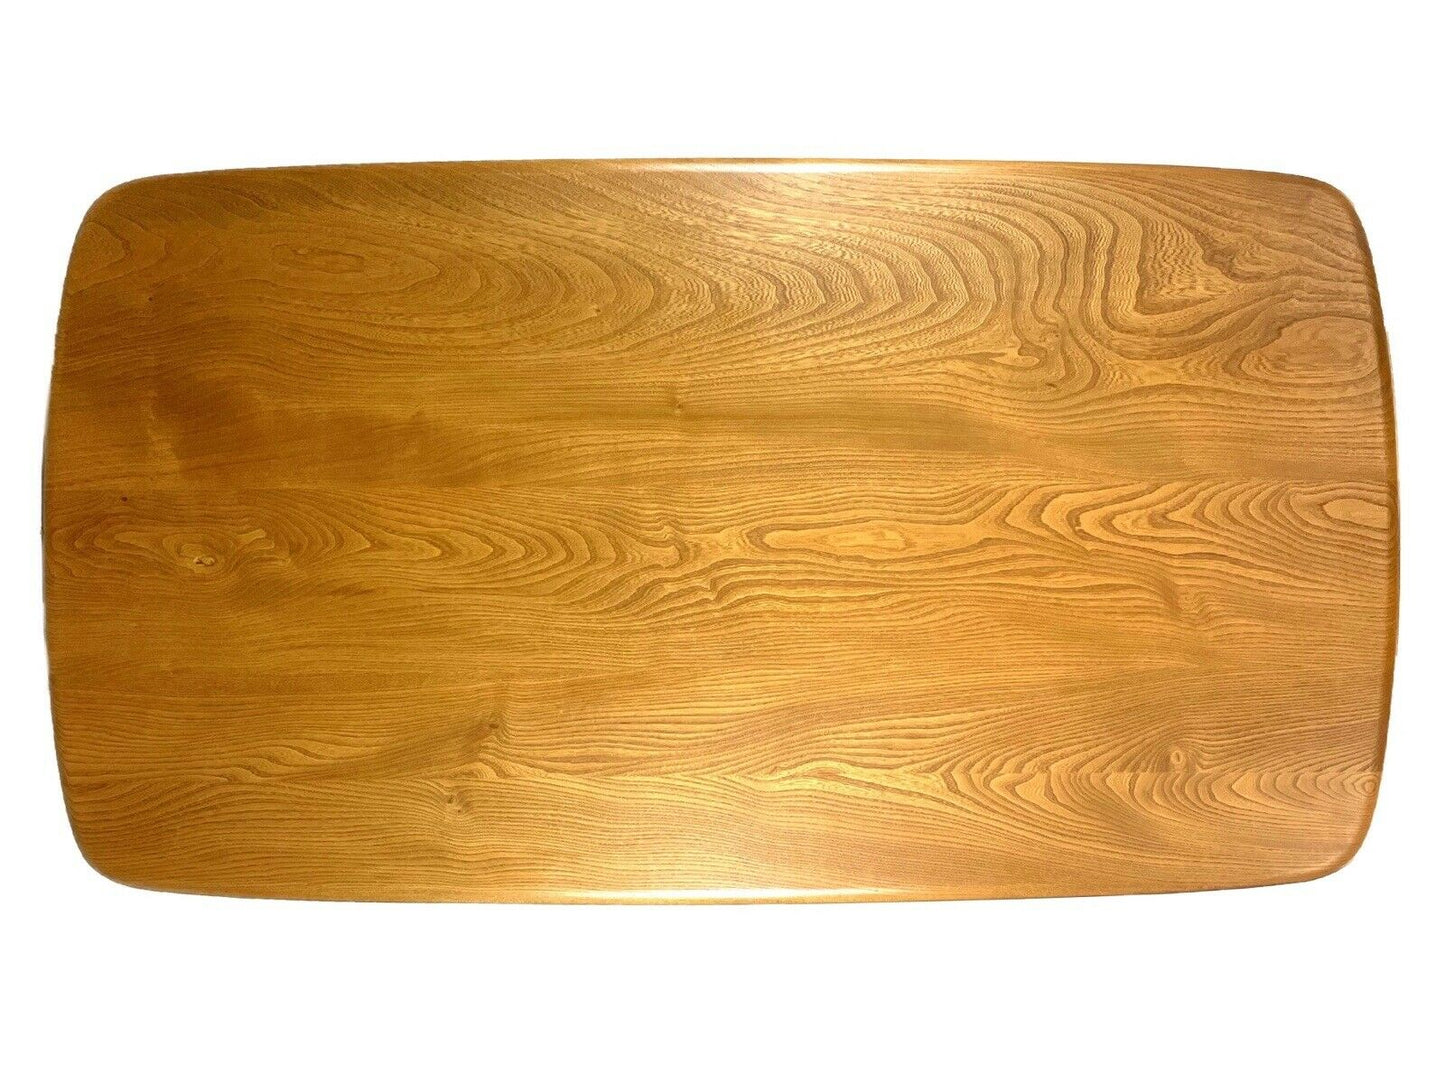 Ercol 755, Mid Century Modern Dining Table, 1980